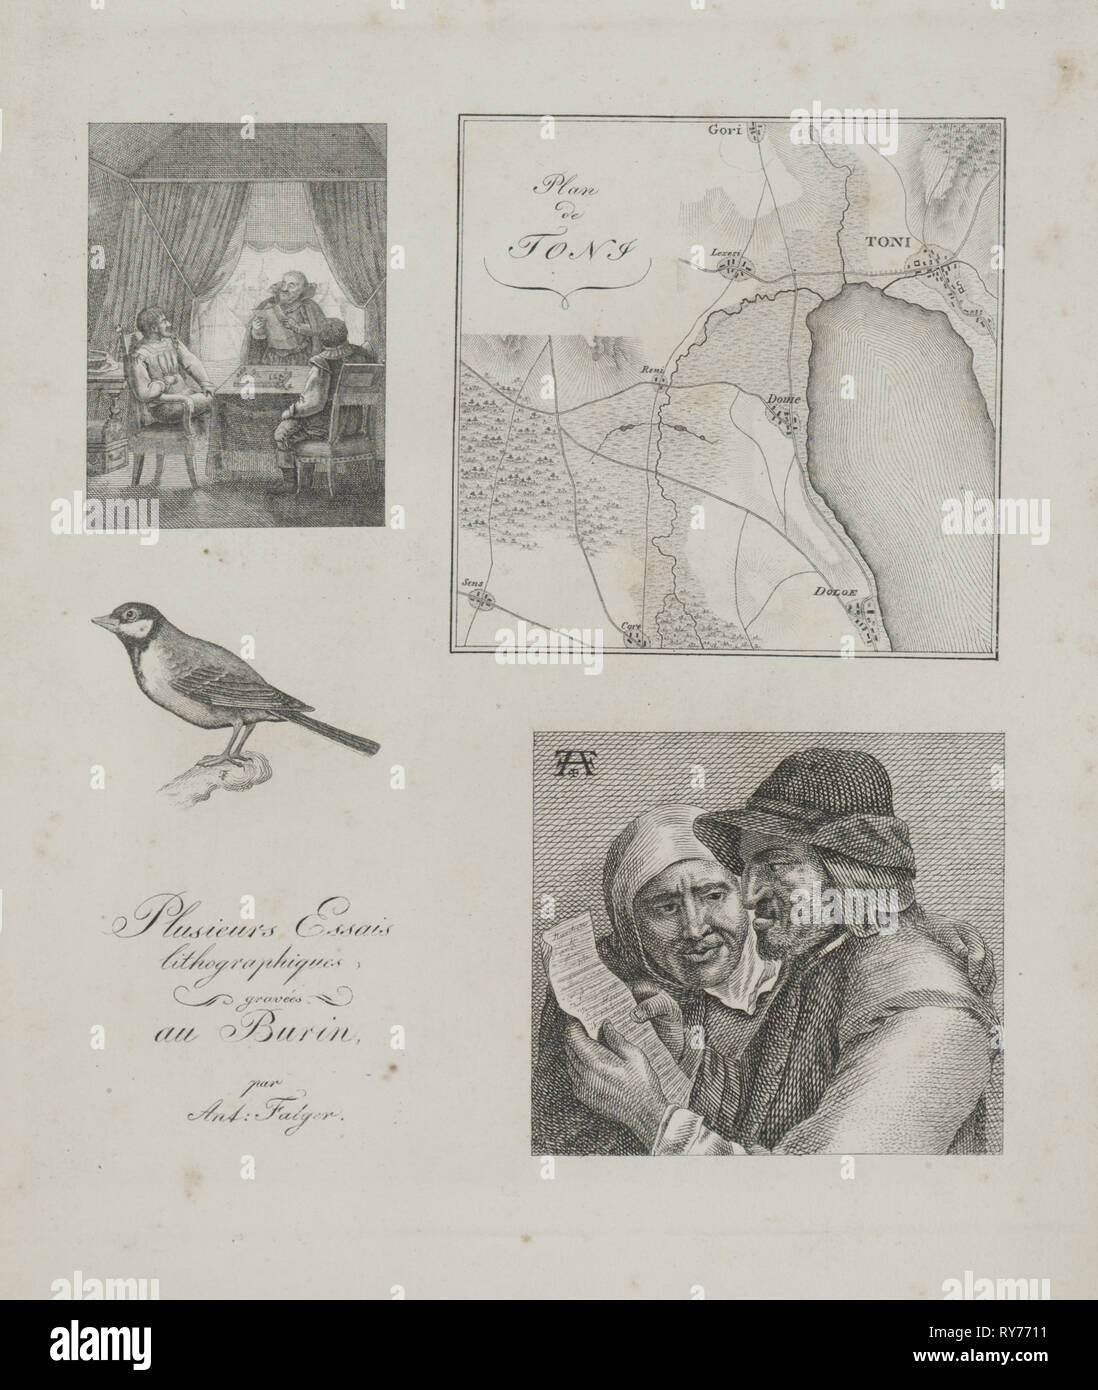 Art of the Lithograph: Four Engraving Samples, War Tent, Map of Toni, Bird, Dutch Farmer and Woman, 1819. Alois Senefelder (German, 1771-1834). Lithograph; sheet: 29.9 x 23.3 cm (11 3/4 x 9 3/16 in.); image: 19.8 x 17.5 cm (7 13/16 x 6 7/8 in Stock Photo